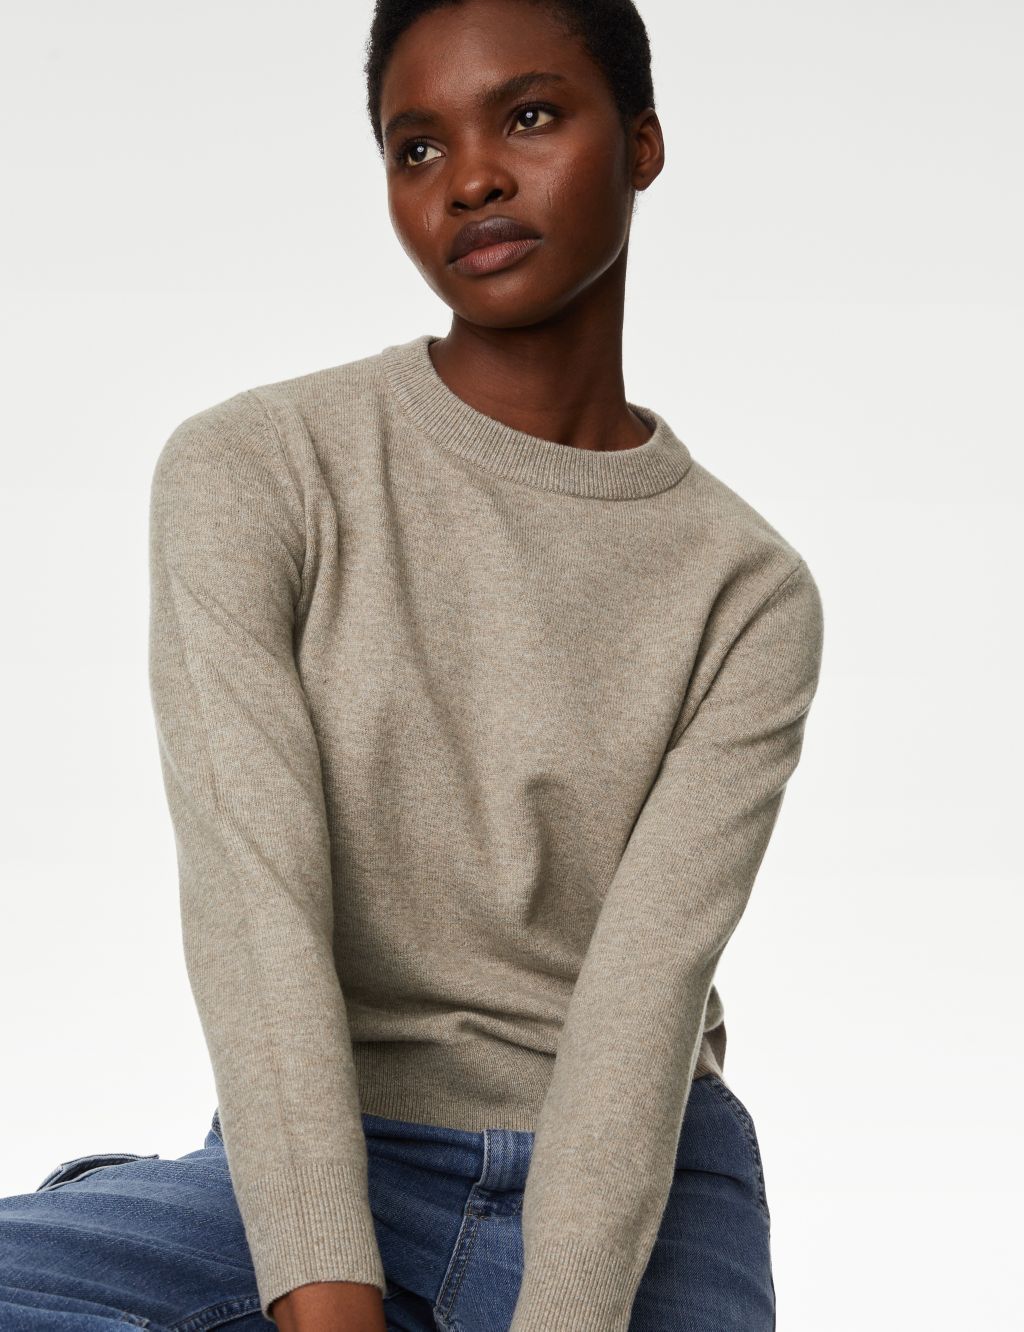 Recycled Blend Crew Neck Jumper image 3